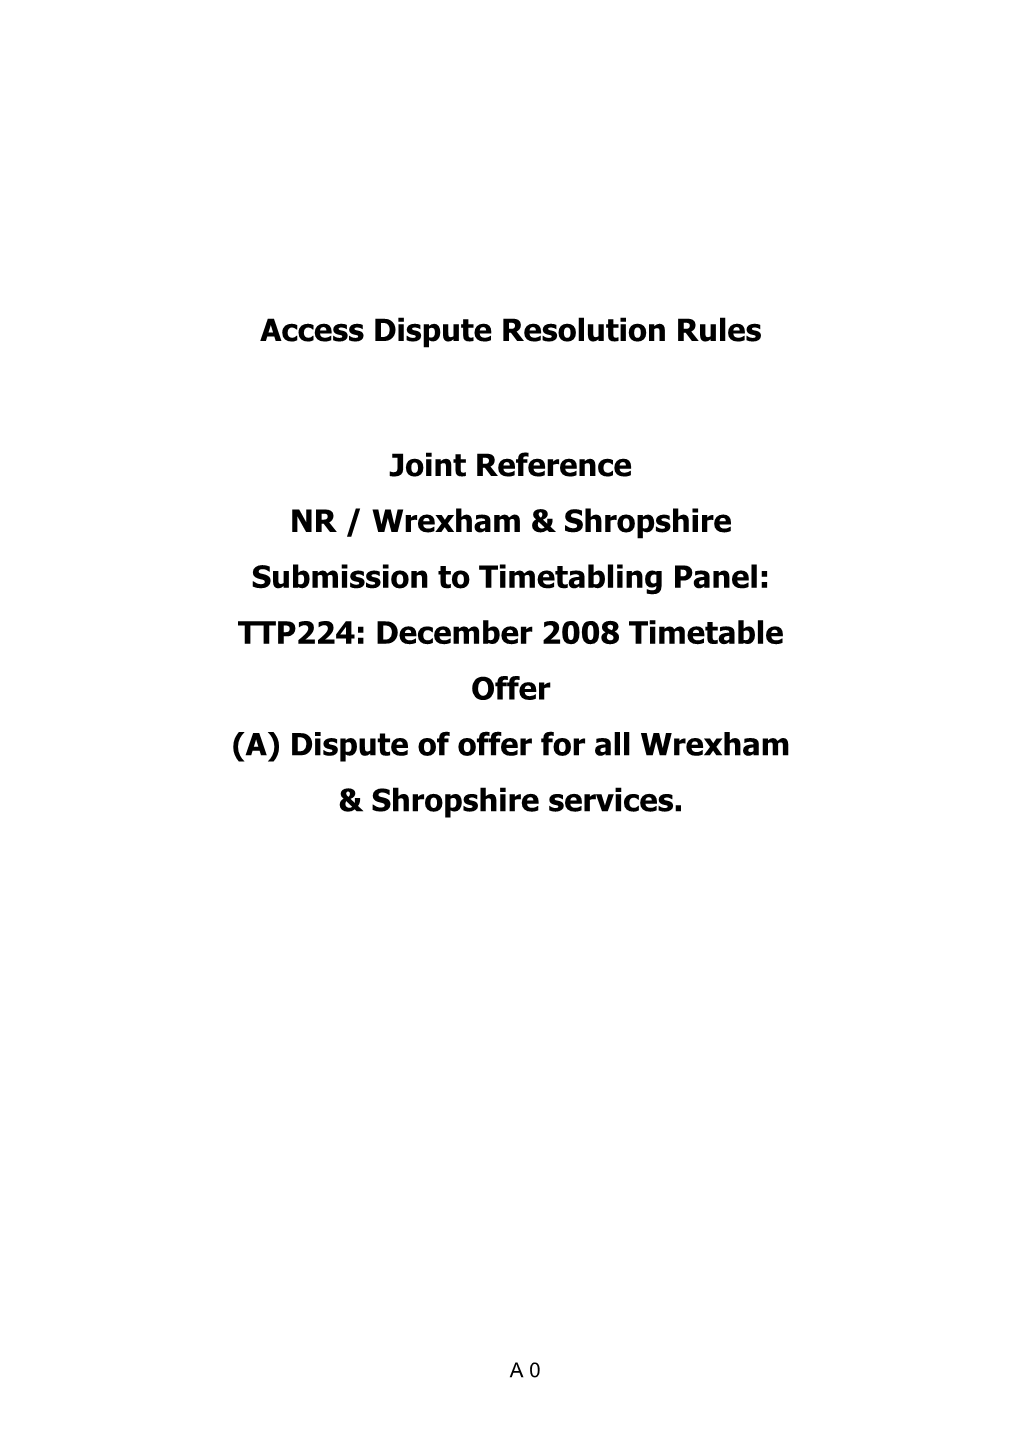 Access Dispute Resolution Rules Joint Reference NR / Wrexham